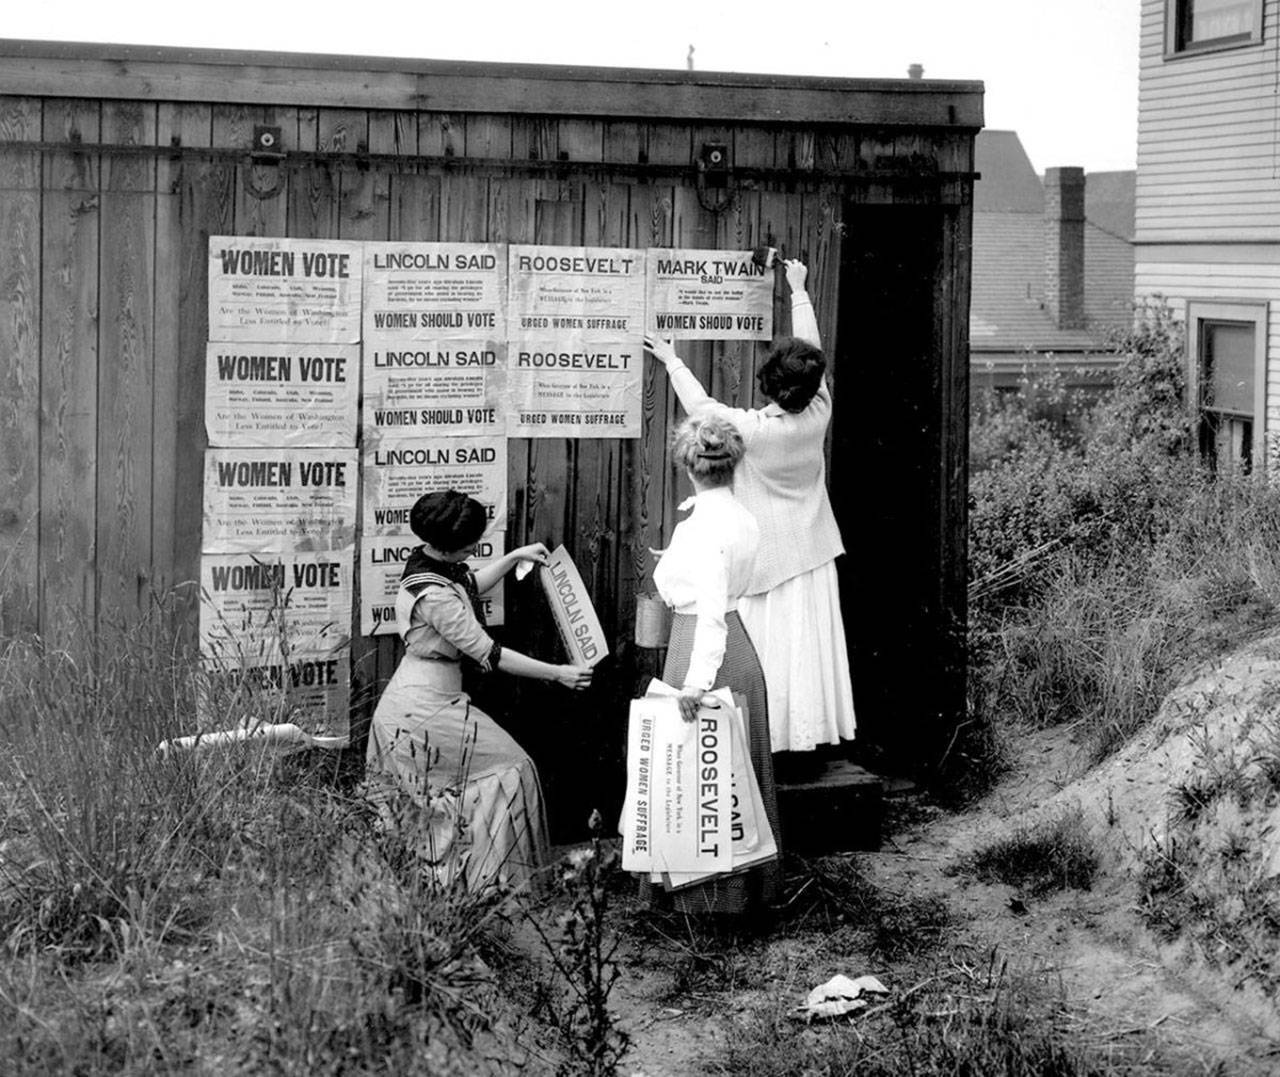 Washington State Archives                                The Washington Equal Suffrage Association places posters in Seattle in 1910 to promote women’s suffrage.